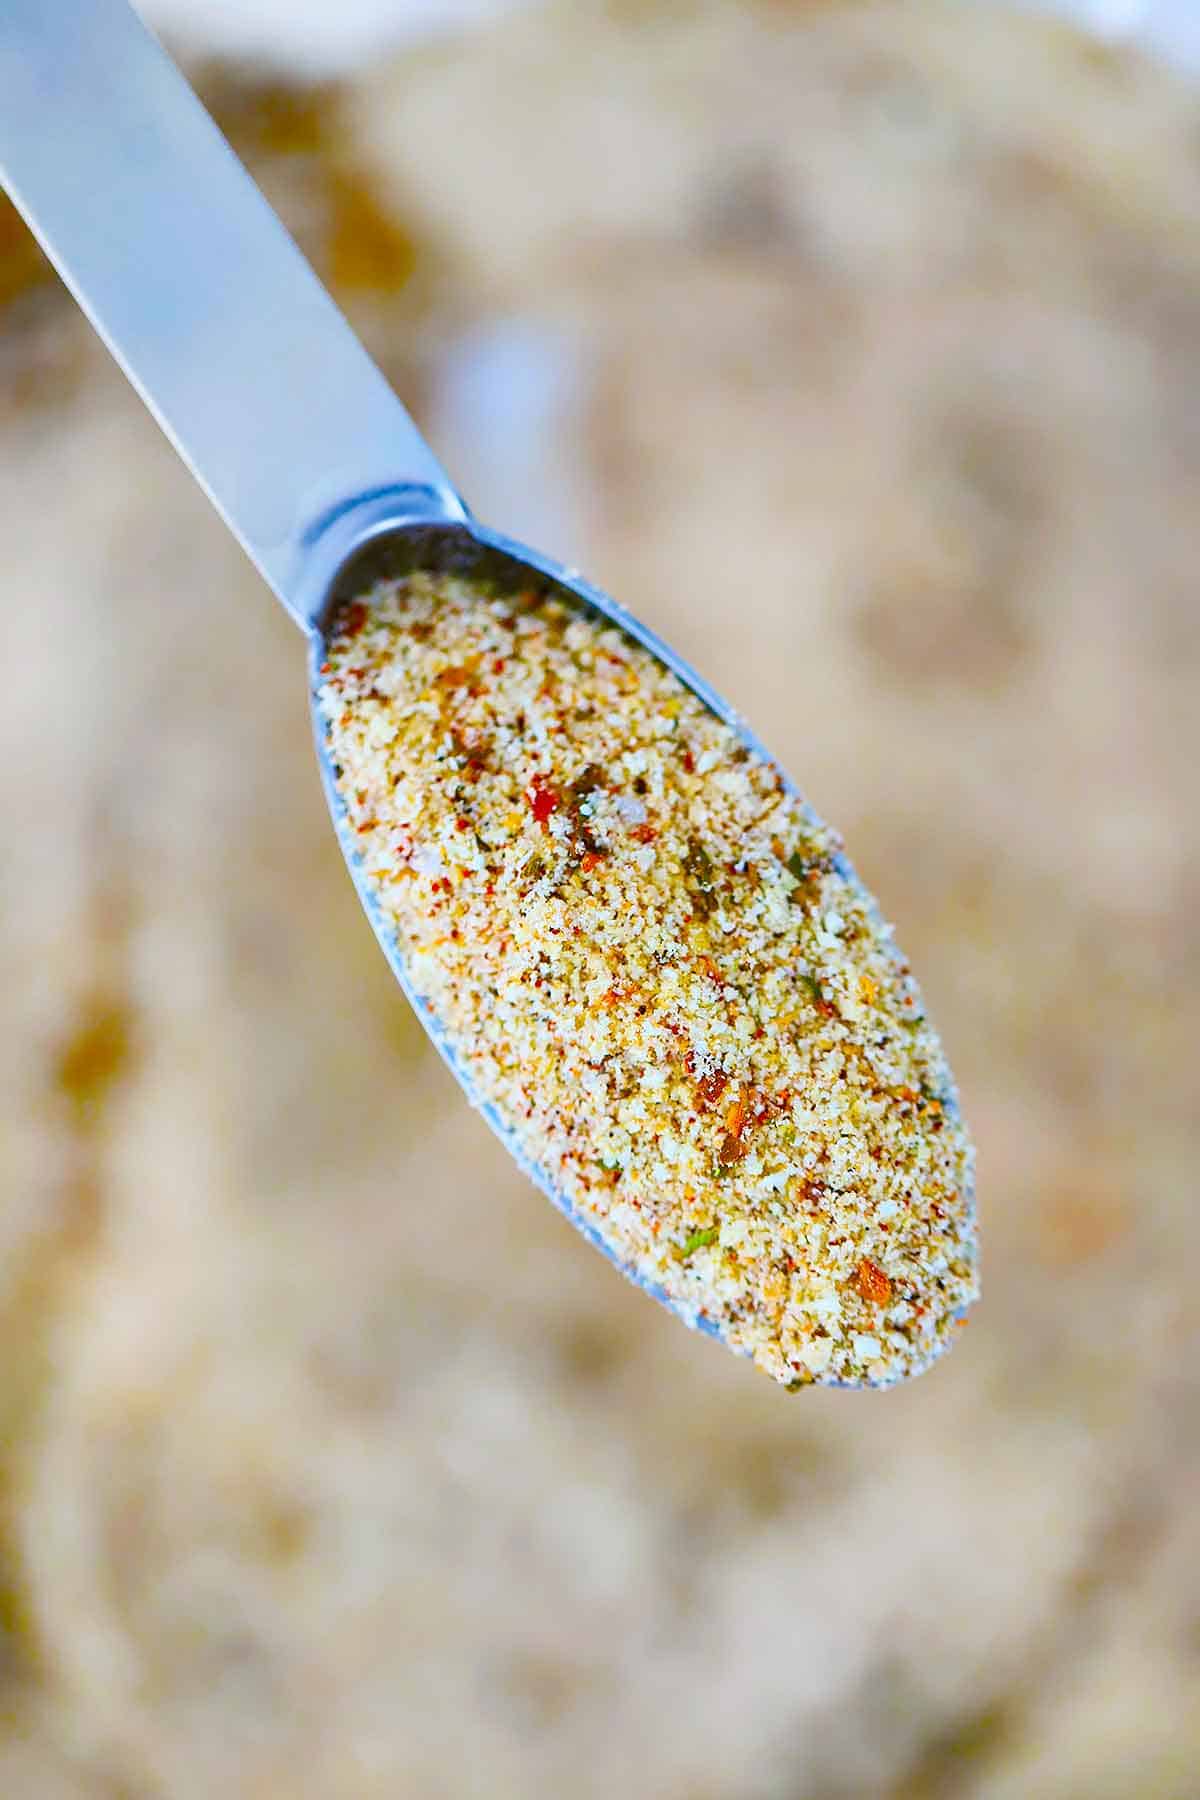 A measuring spoon filled with Italian bread crumbs (close up photo).